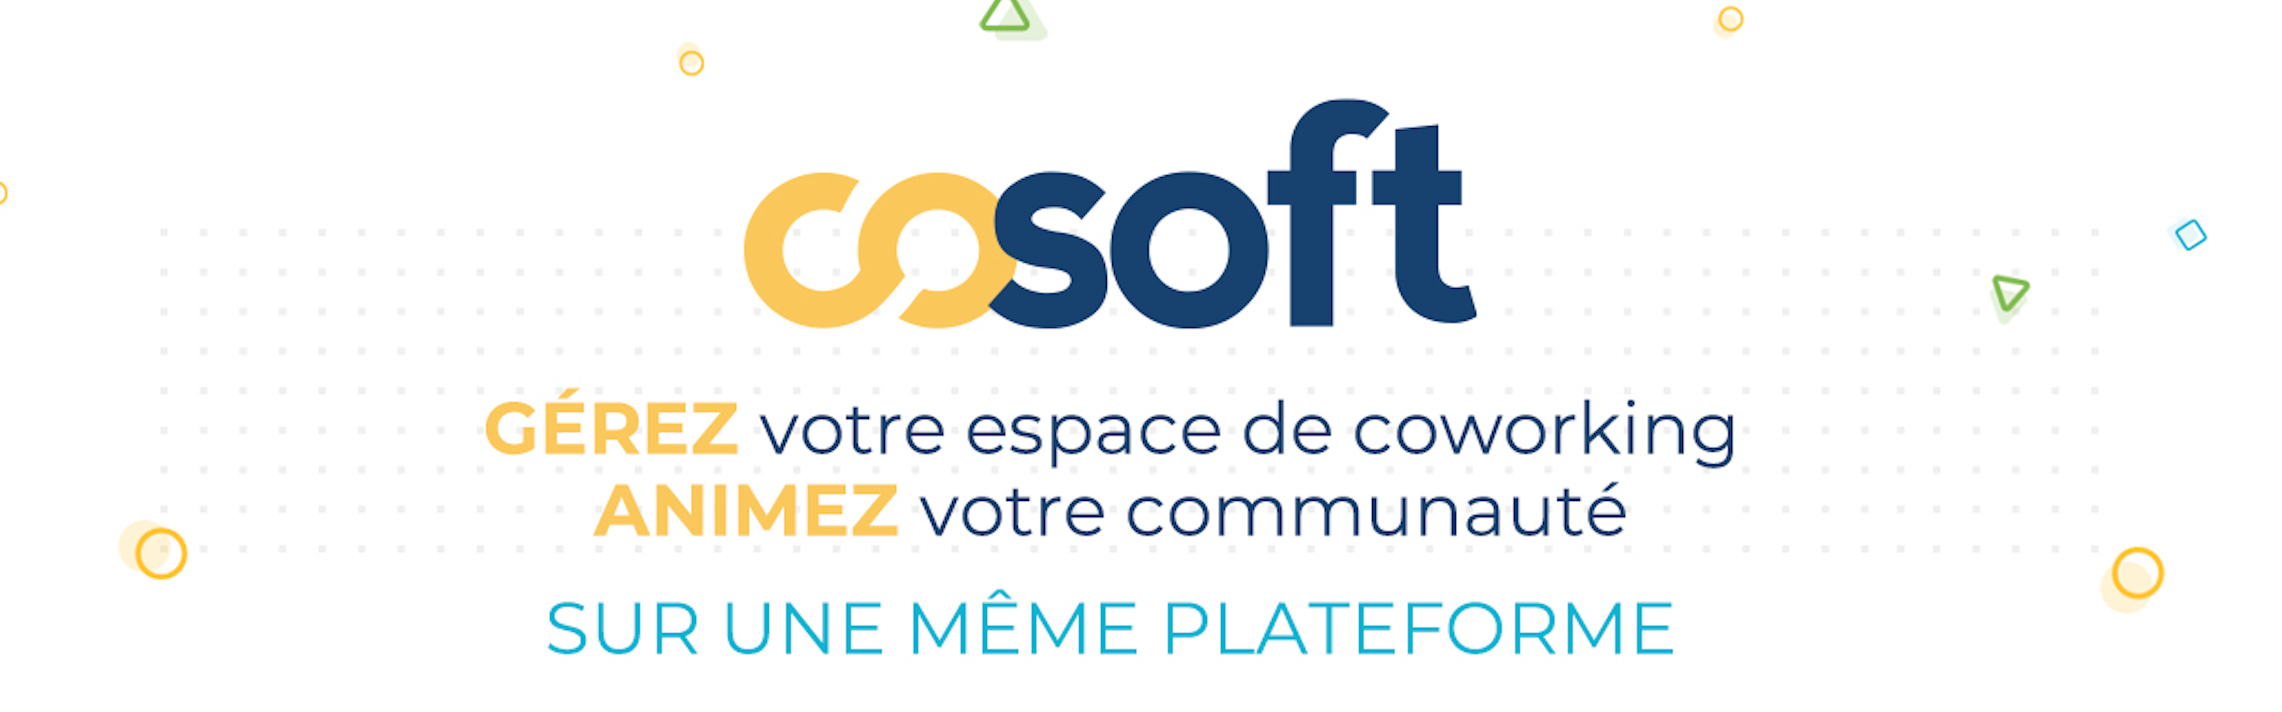 Review Cosoft: Coworking space management tool - Appvizer